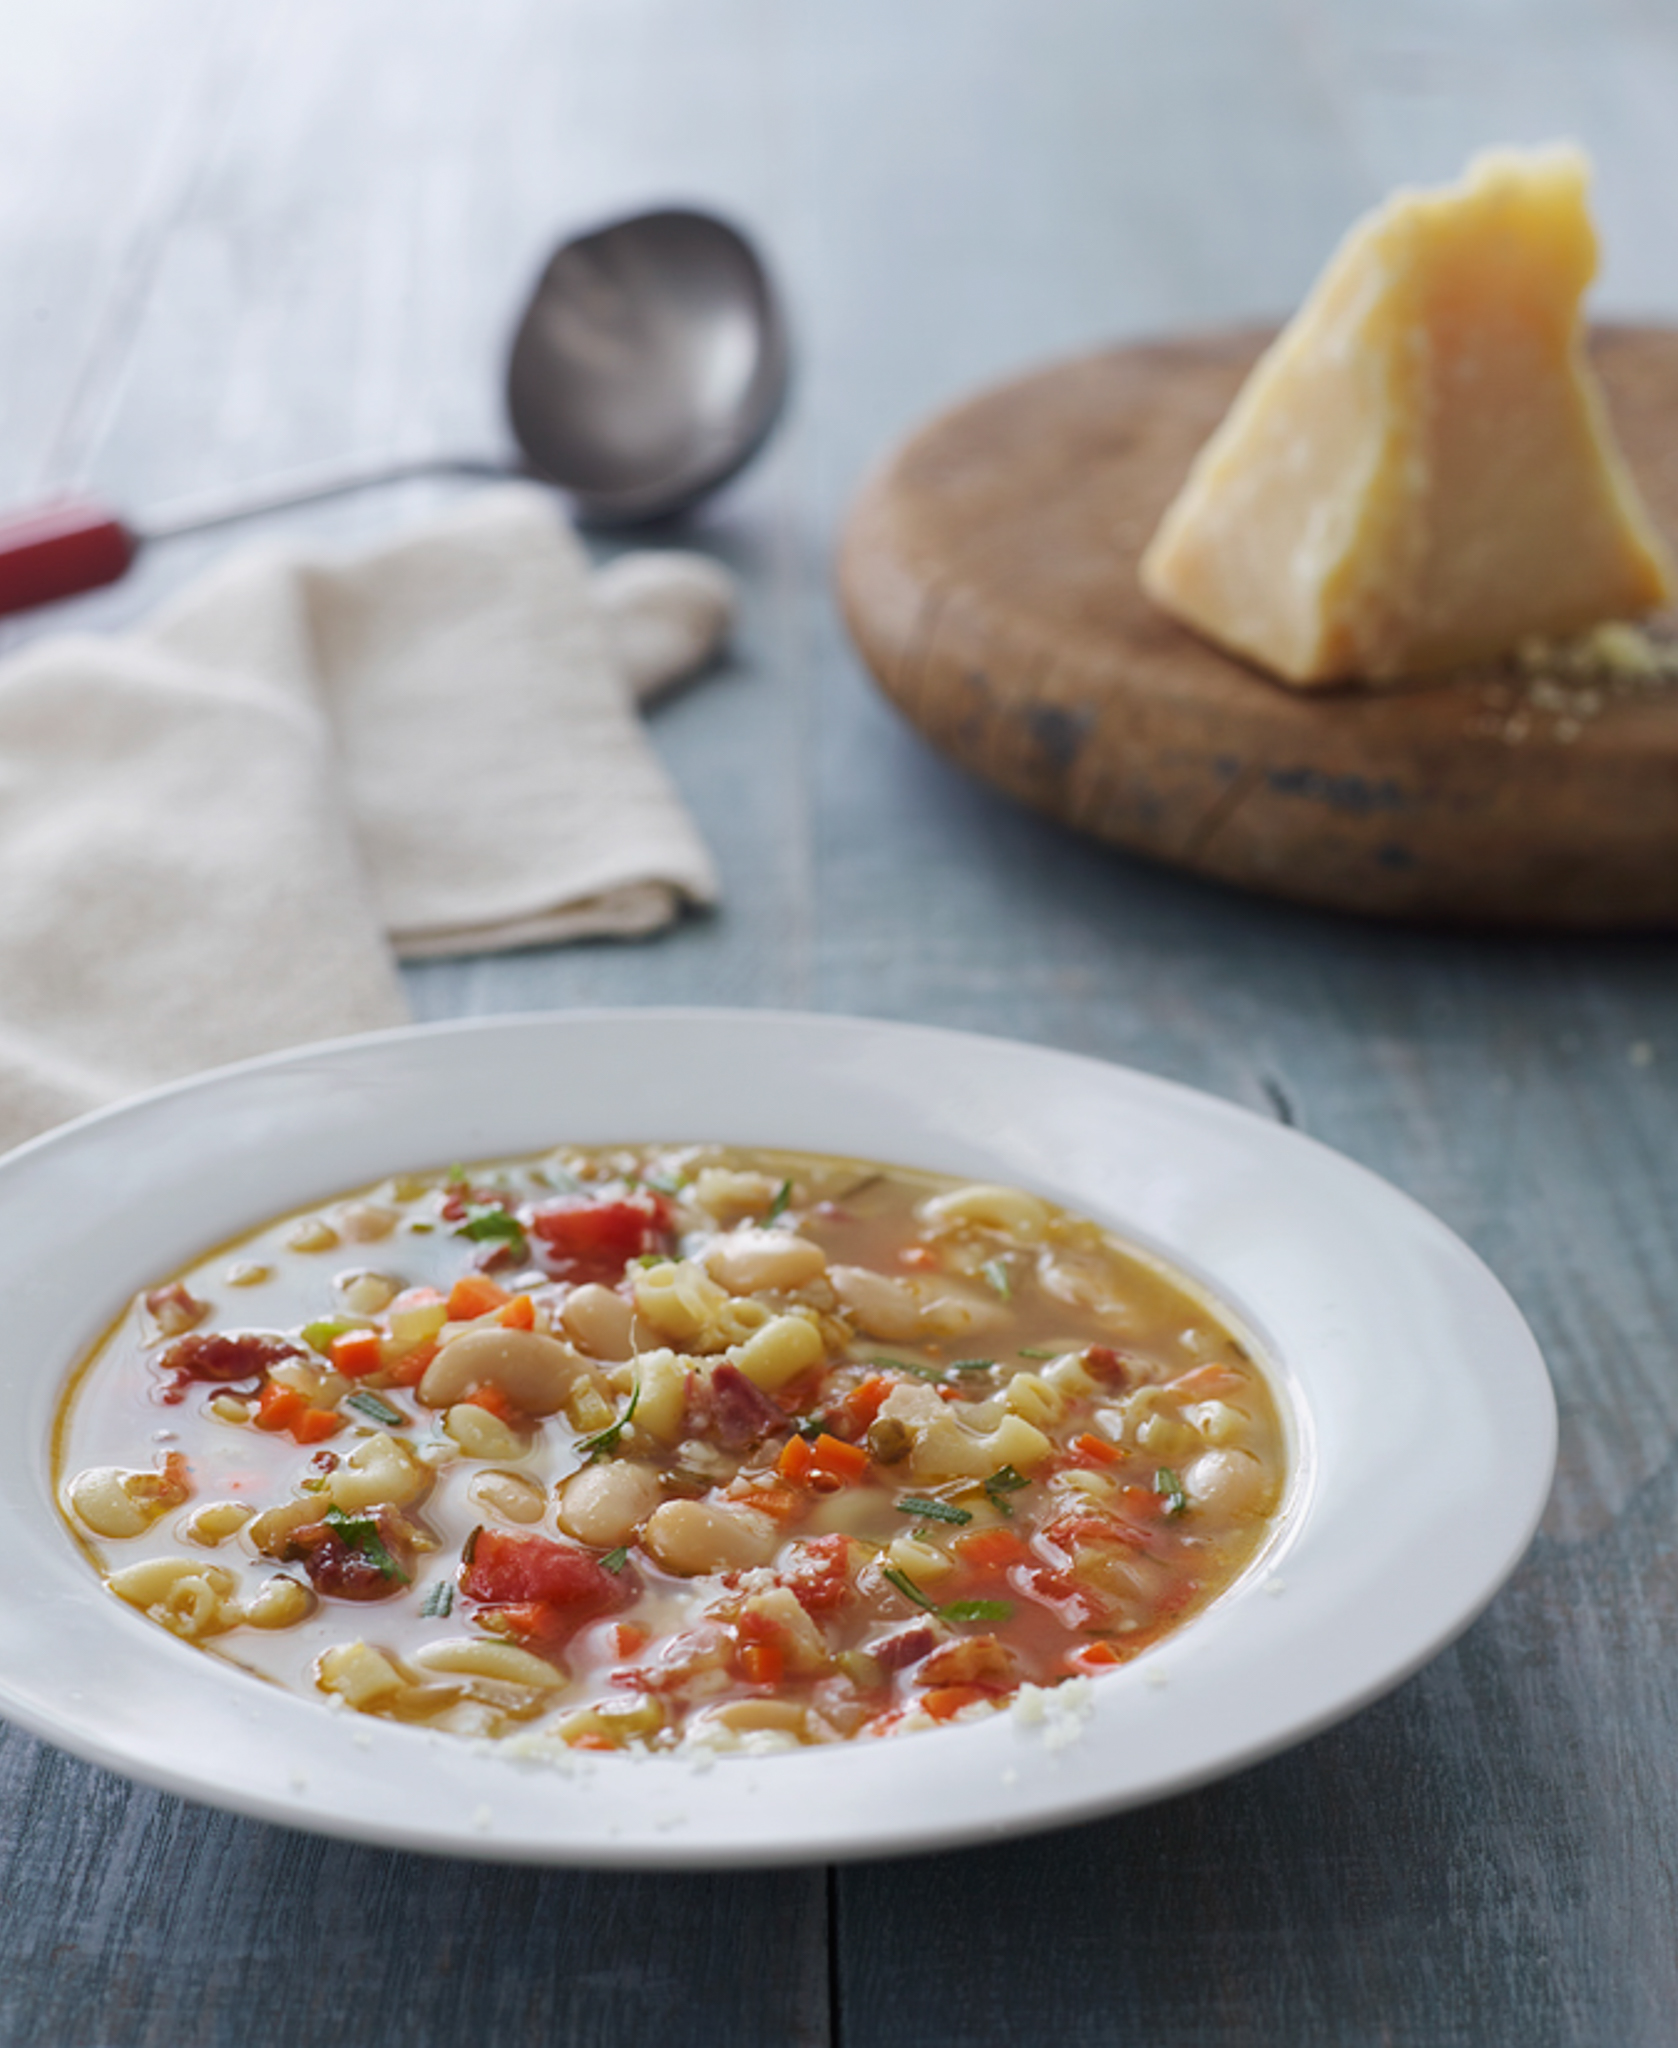 Our fresh deli soups are perfect for these chilly days! Rotating